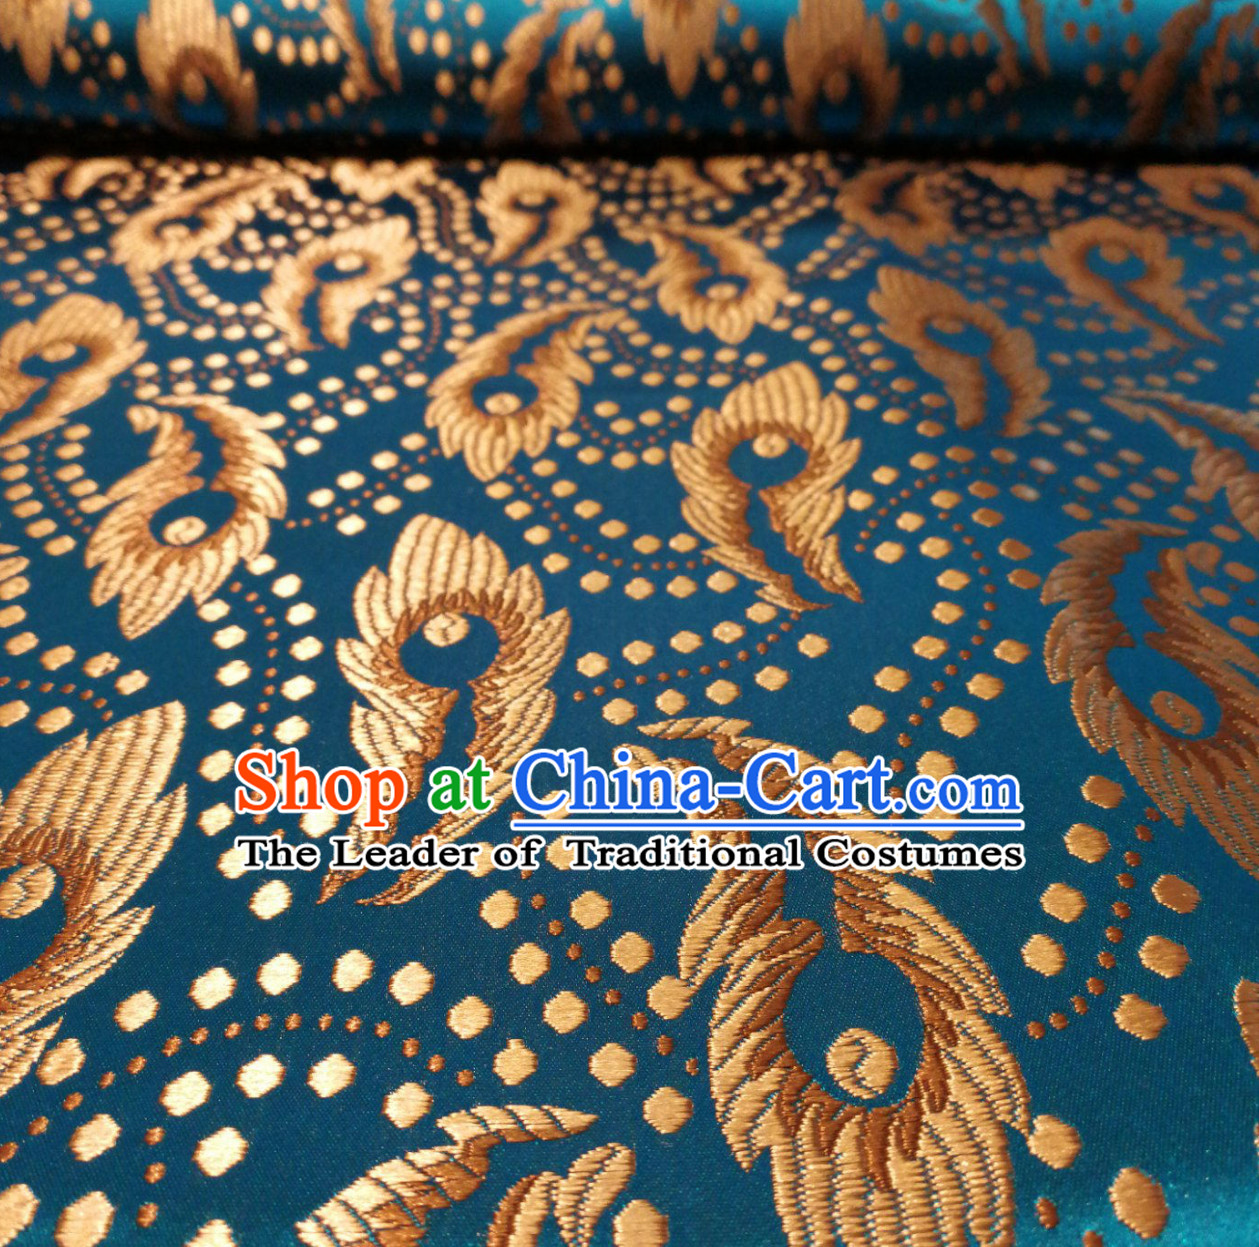 Lake Blue Color Chinese Royal Palace Style Traditional Pattern Design Brocade Fabric Silk Fabric Chinese Fabric Asian Material